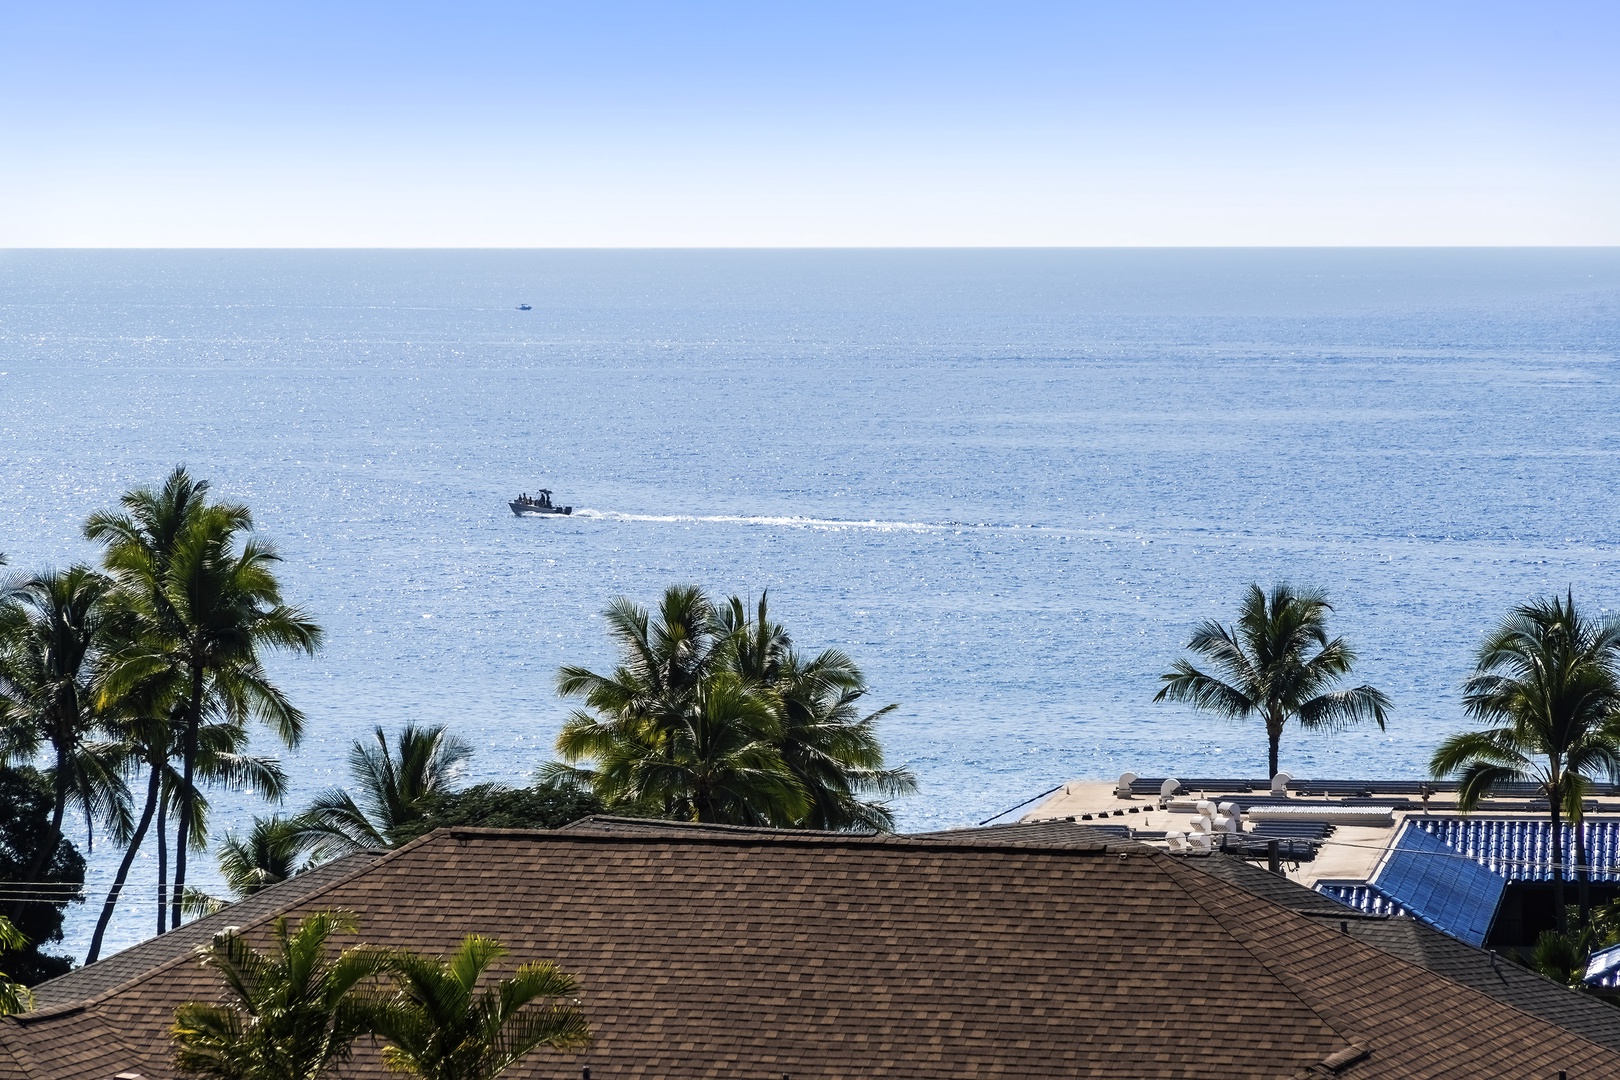 Kailua-Kona Vacation Rentals, Kona Mansions D231 - Zoomed view over the roof of the building in front